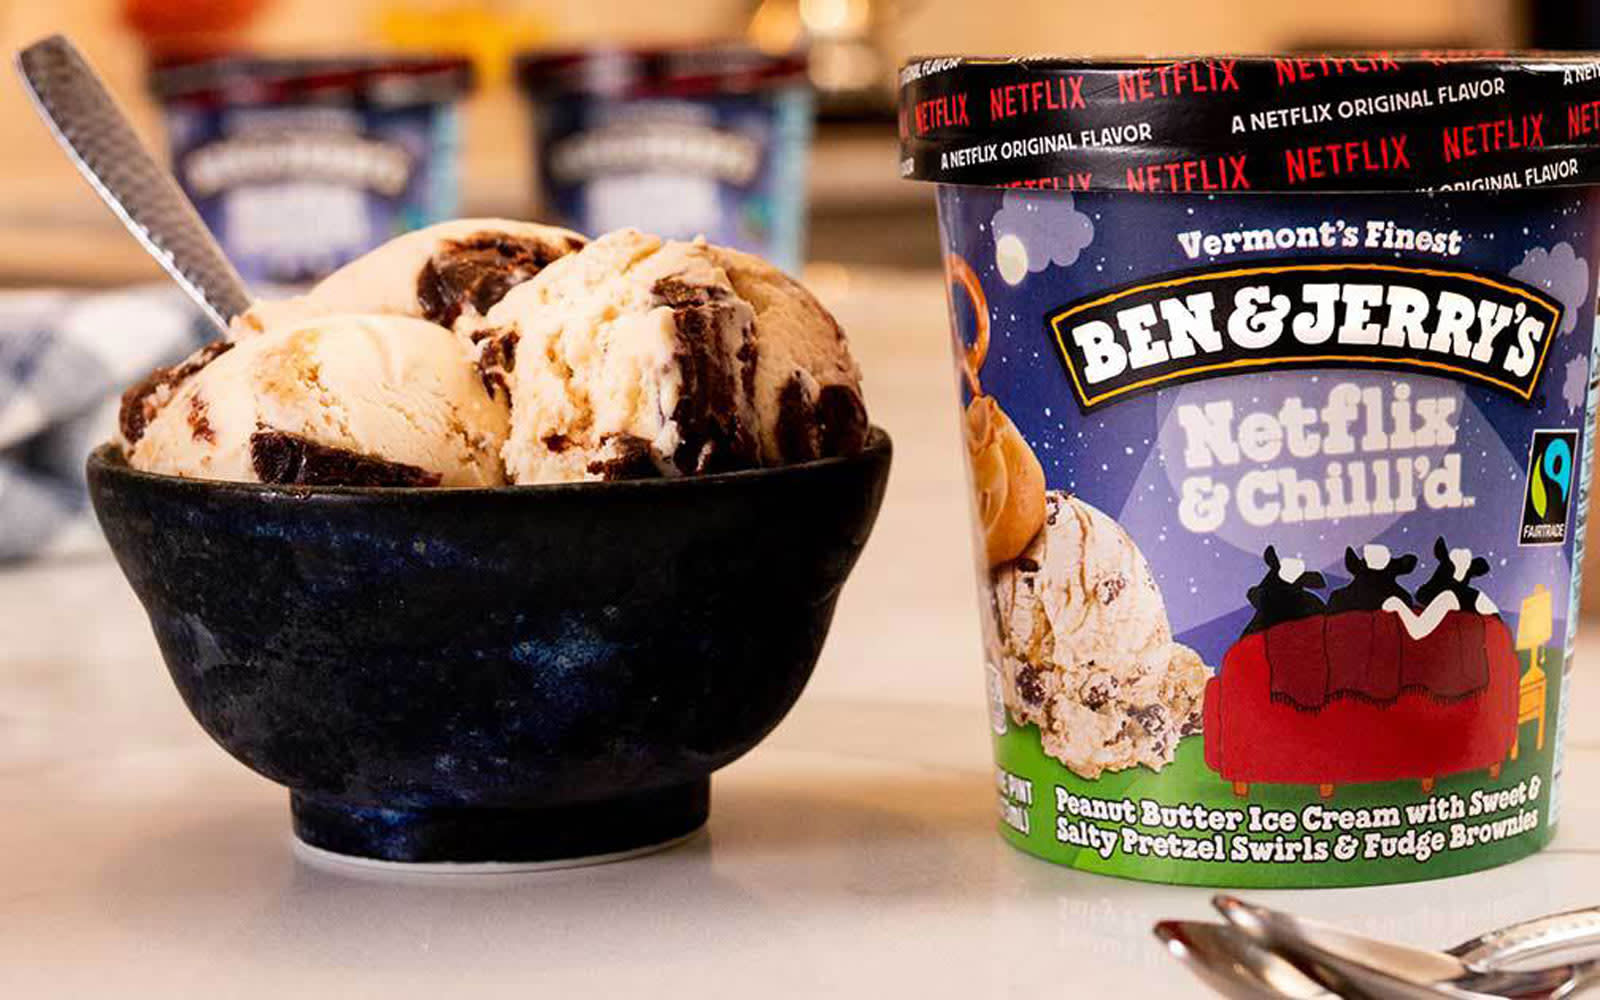 Ben & Jerry’s made a binge-worthy Netflix and Chill’d ice cream flavor ...